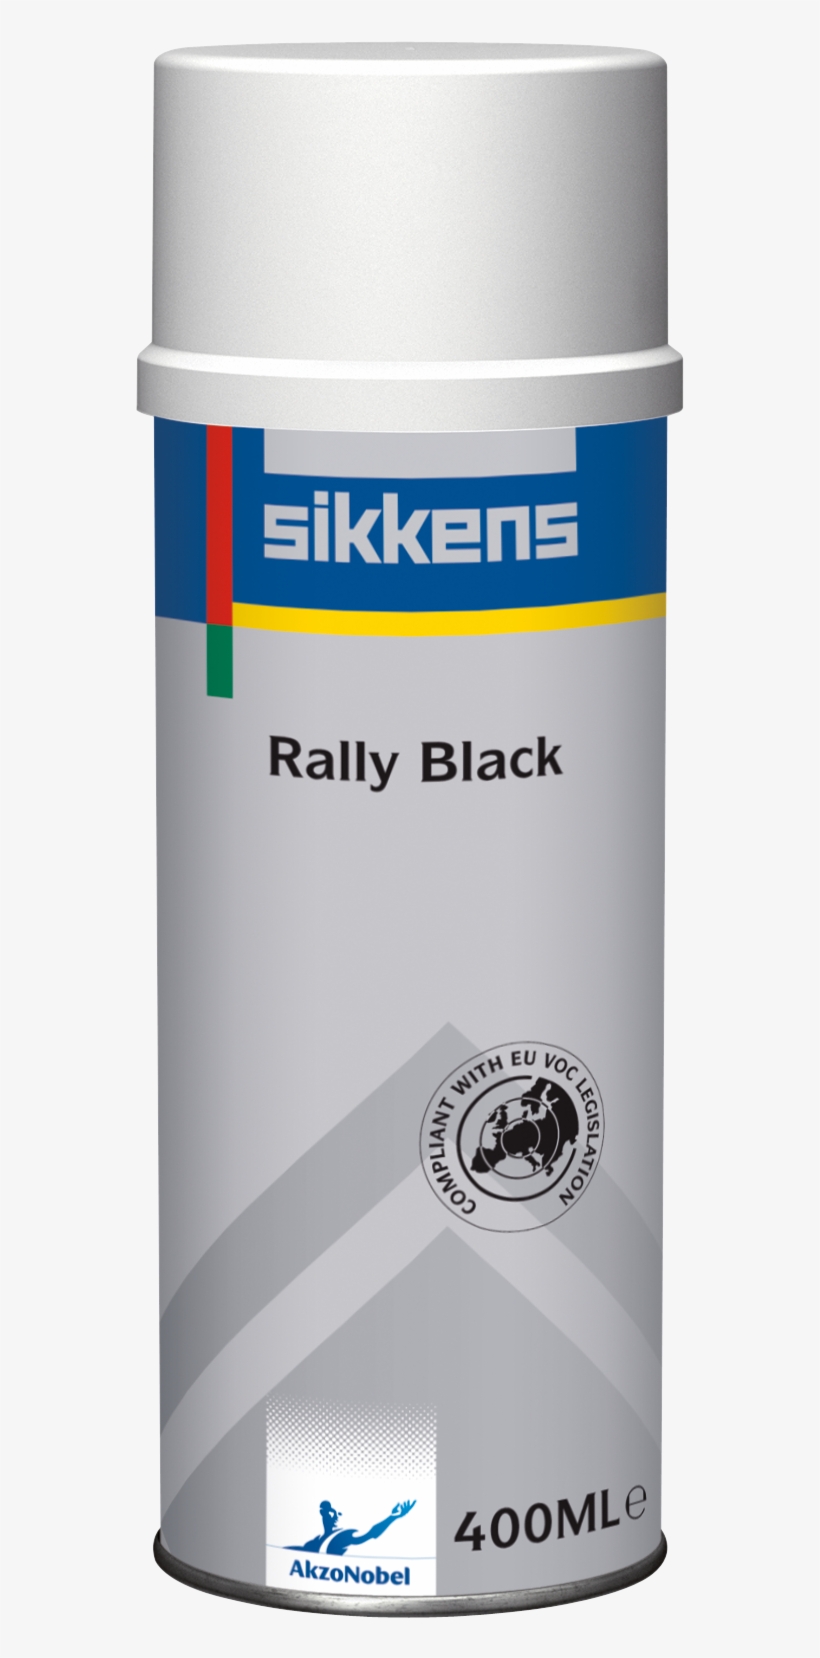 Sikkens Rally Black Spray Can 400ml - Sikkens, transparent png #8639017